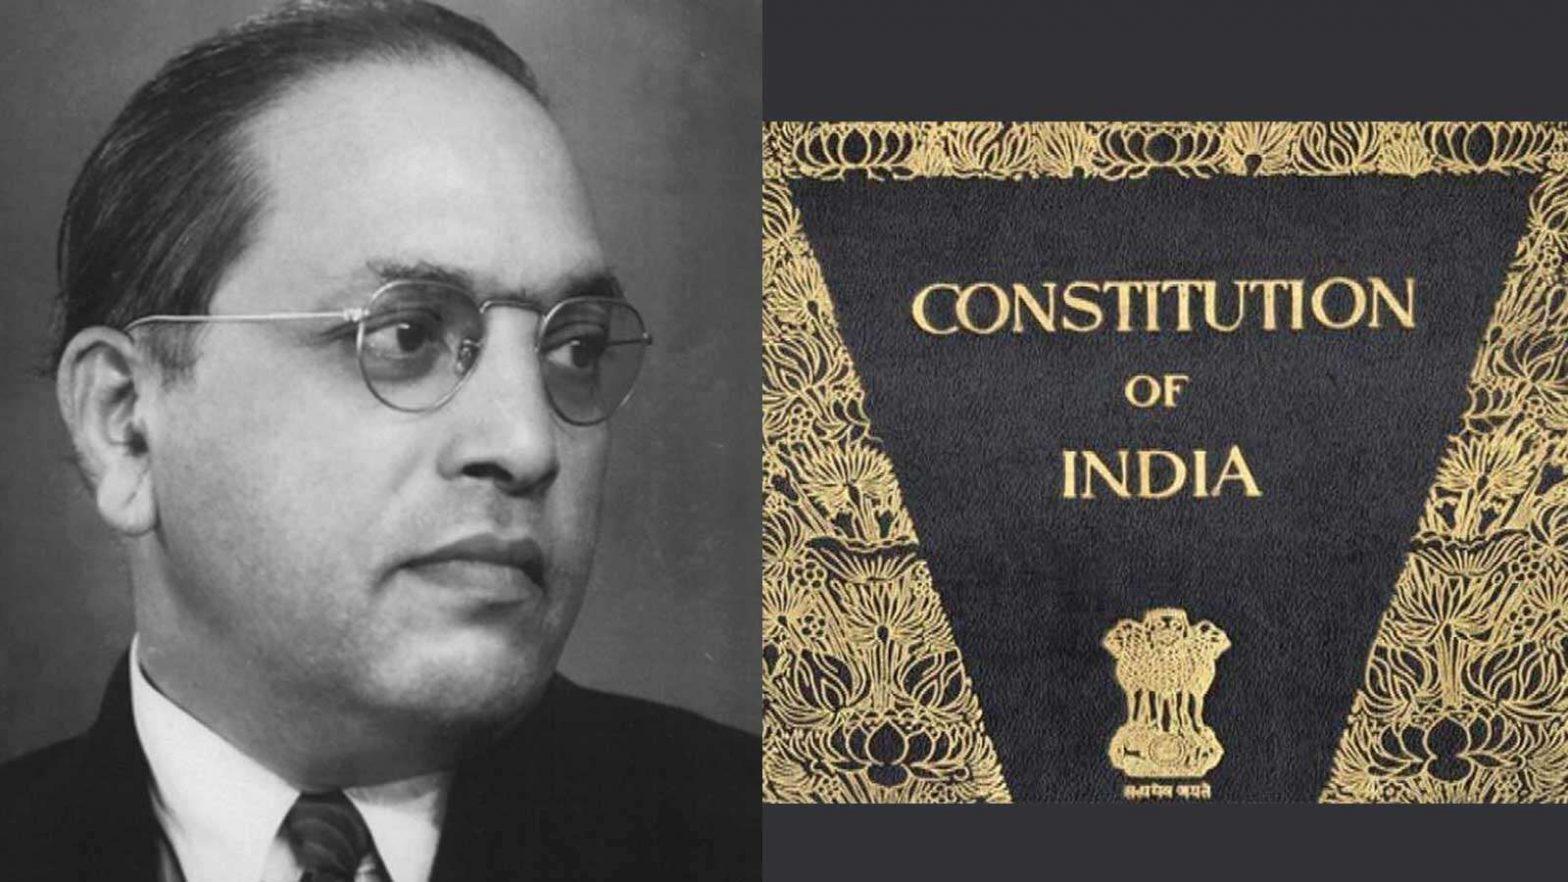 Indian Constitution Day 2021: Observed on 26 November